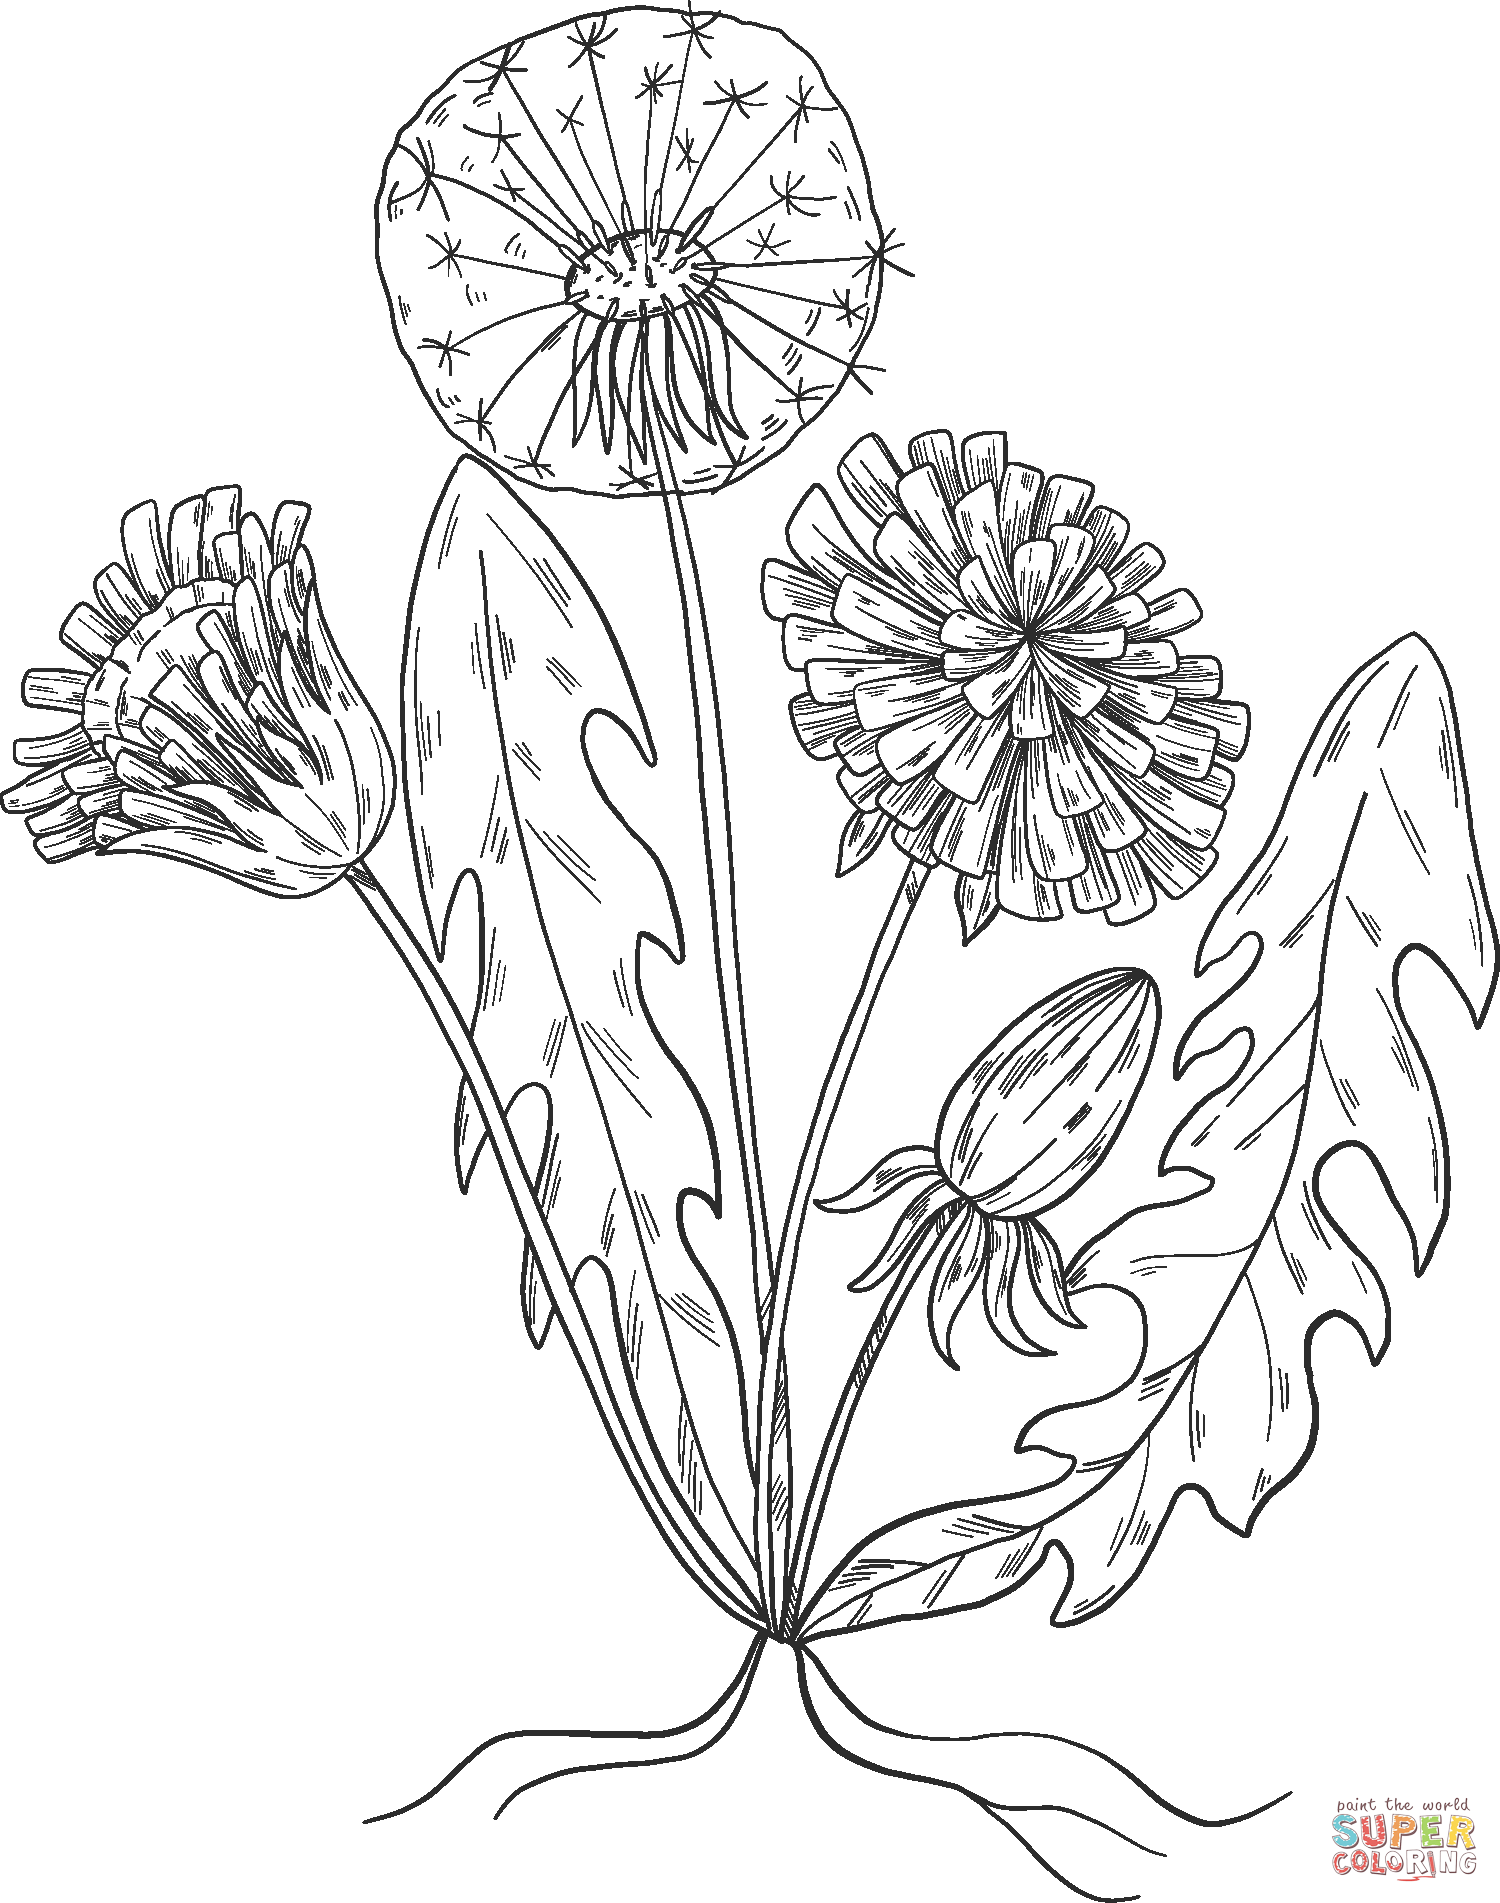 Dandelion Plant coloring page | Free Printable Coloring Pages